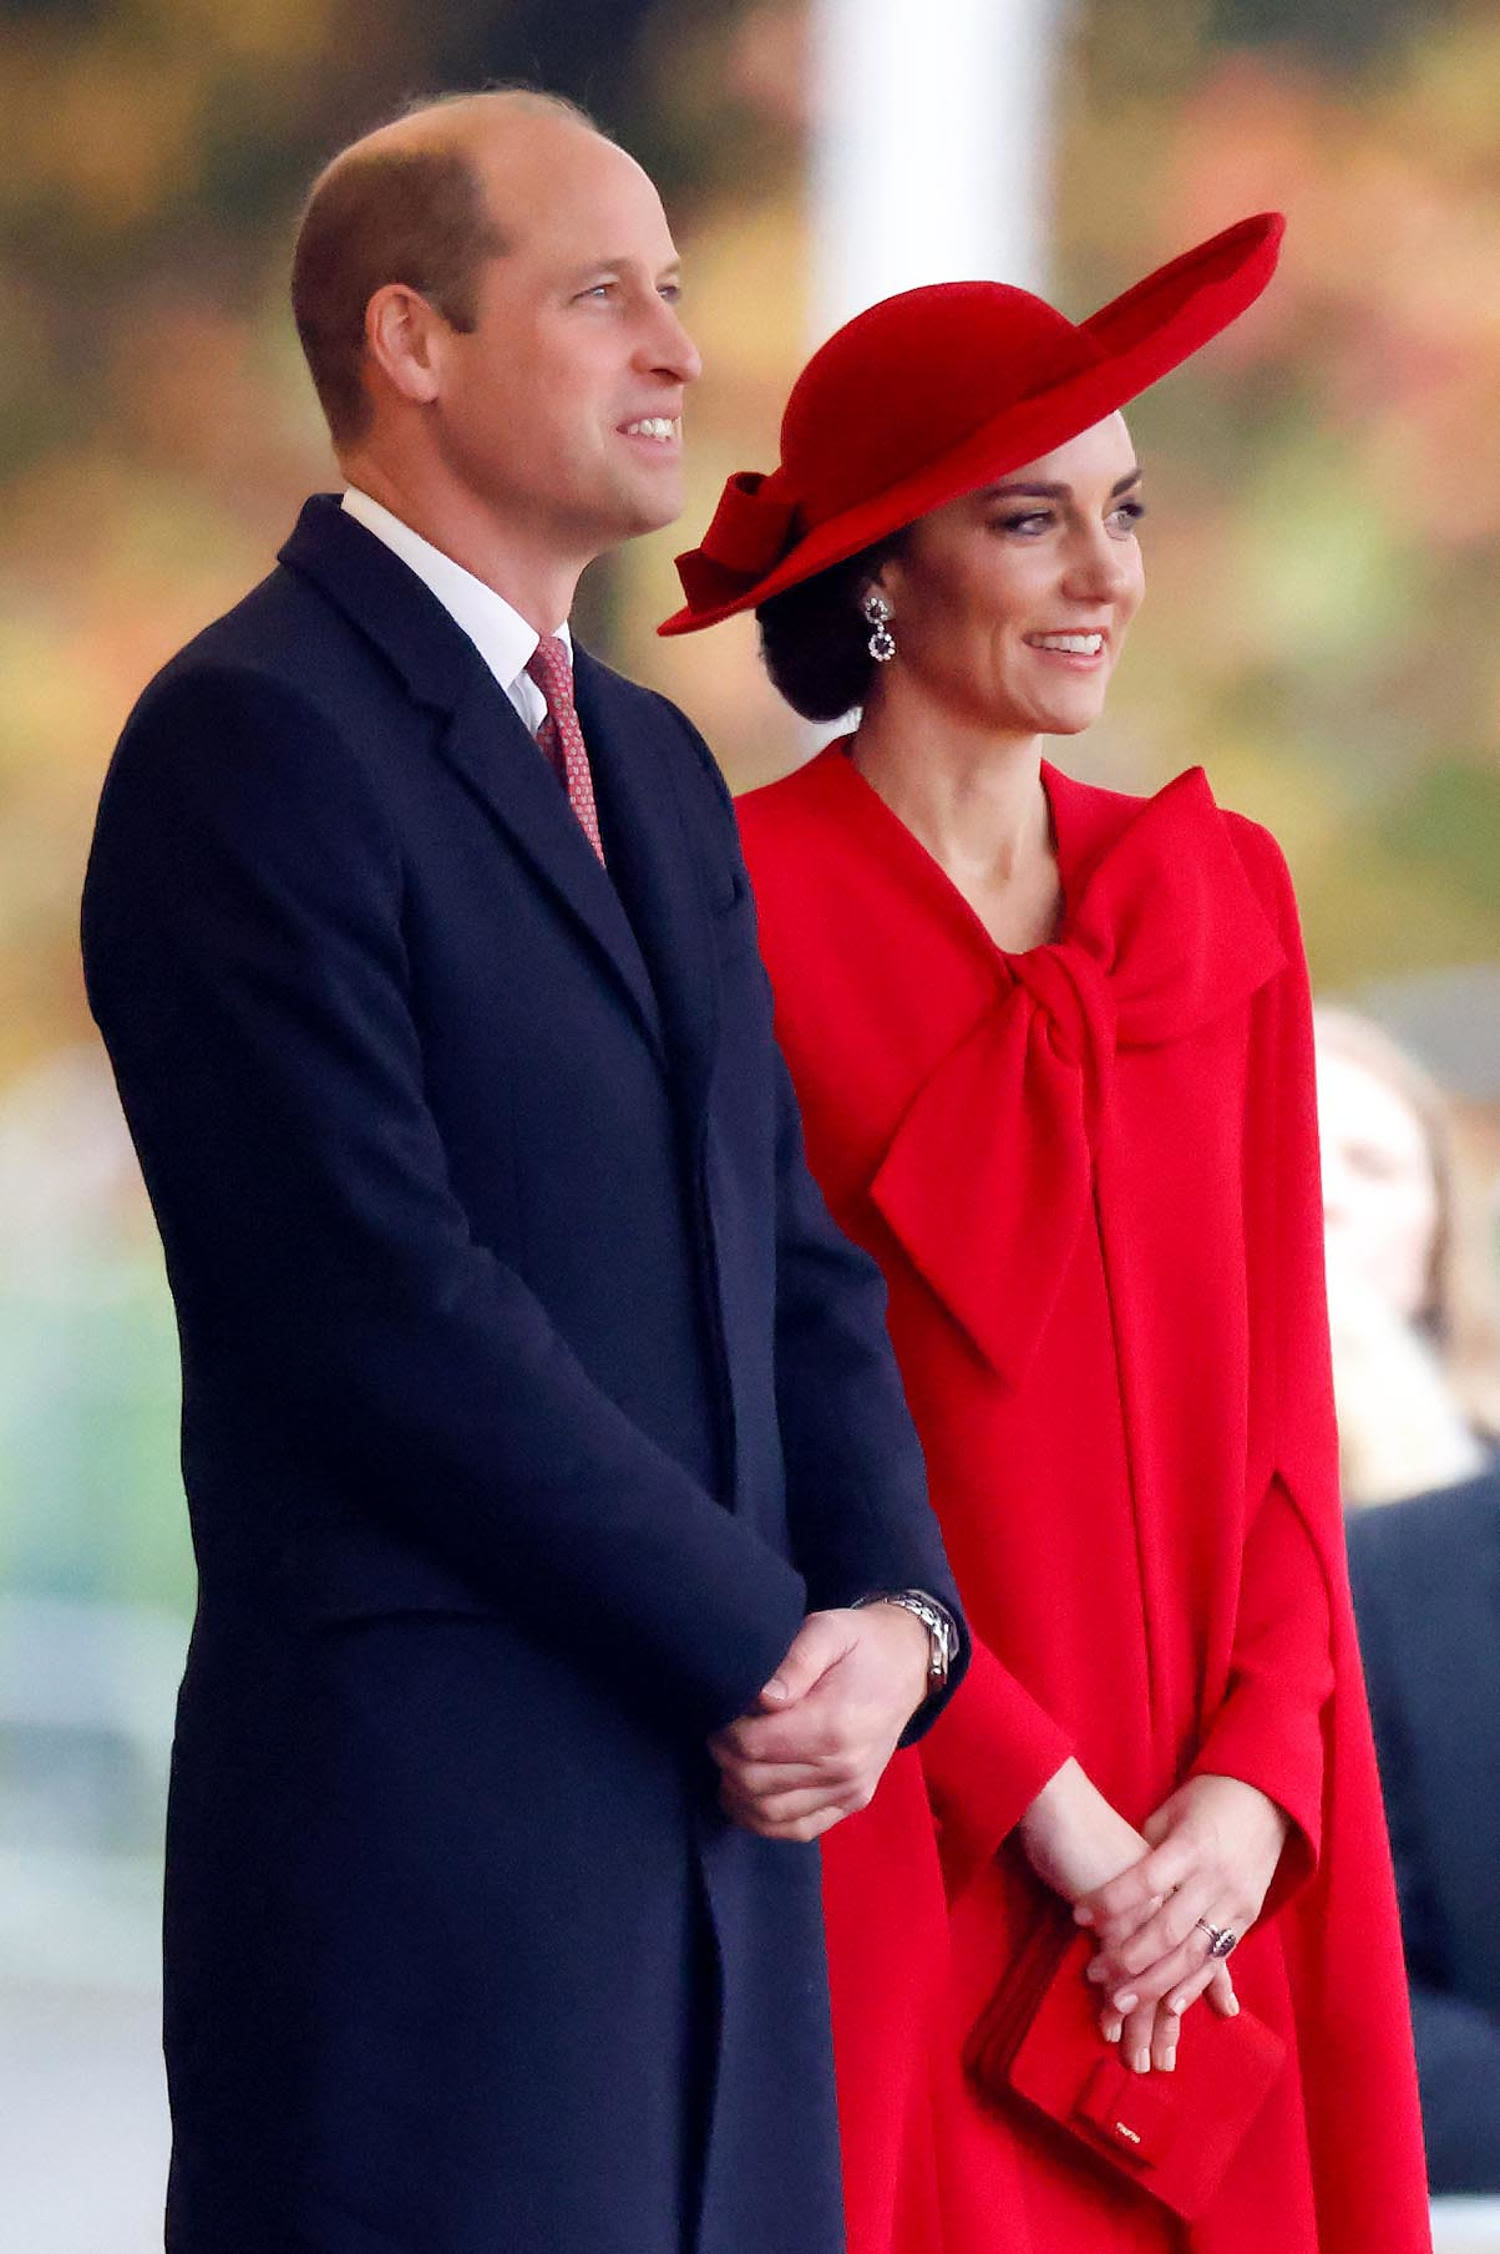 Prince William and Kate Middleton celebrate their 13th wedding anniversary